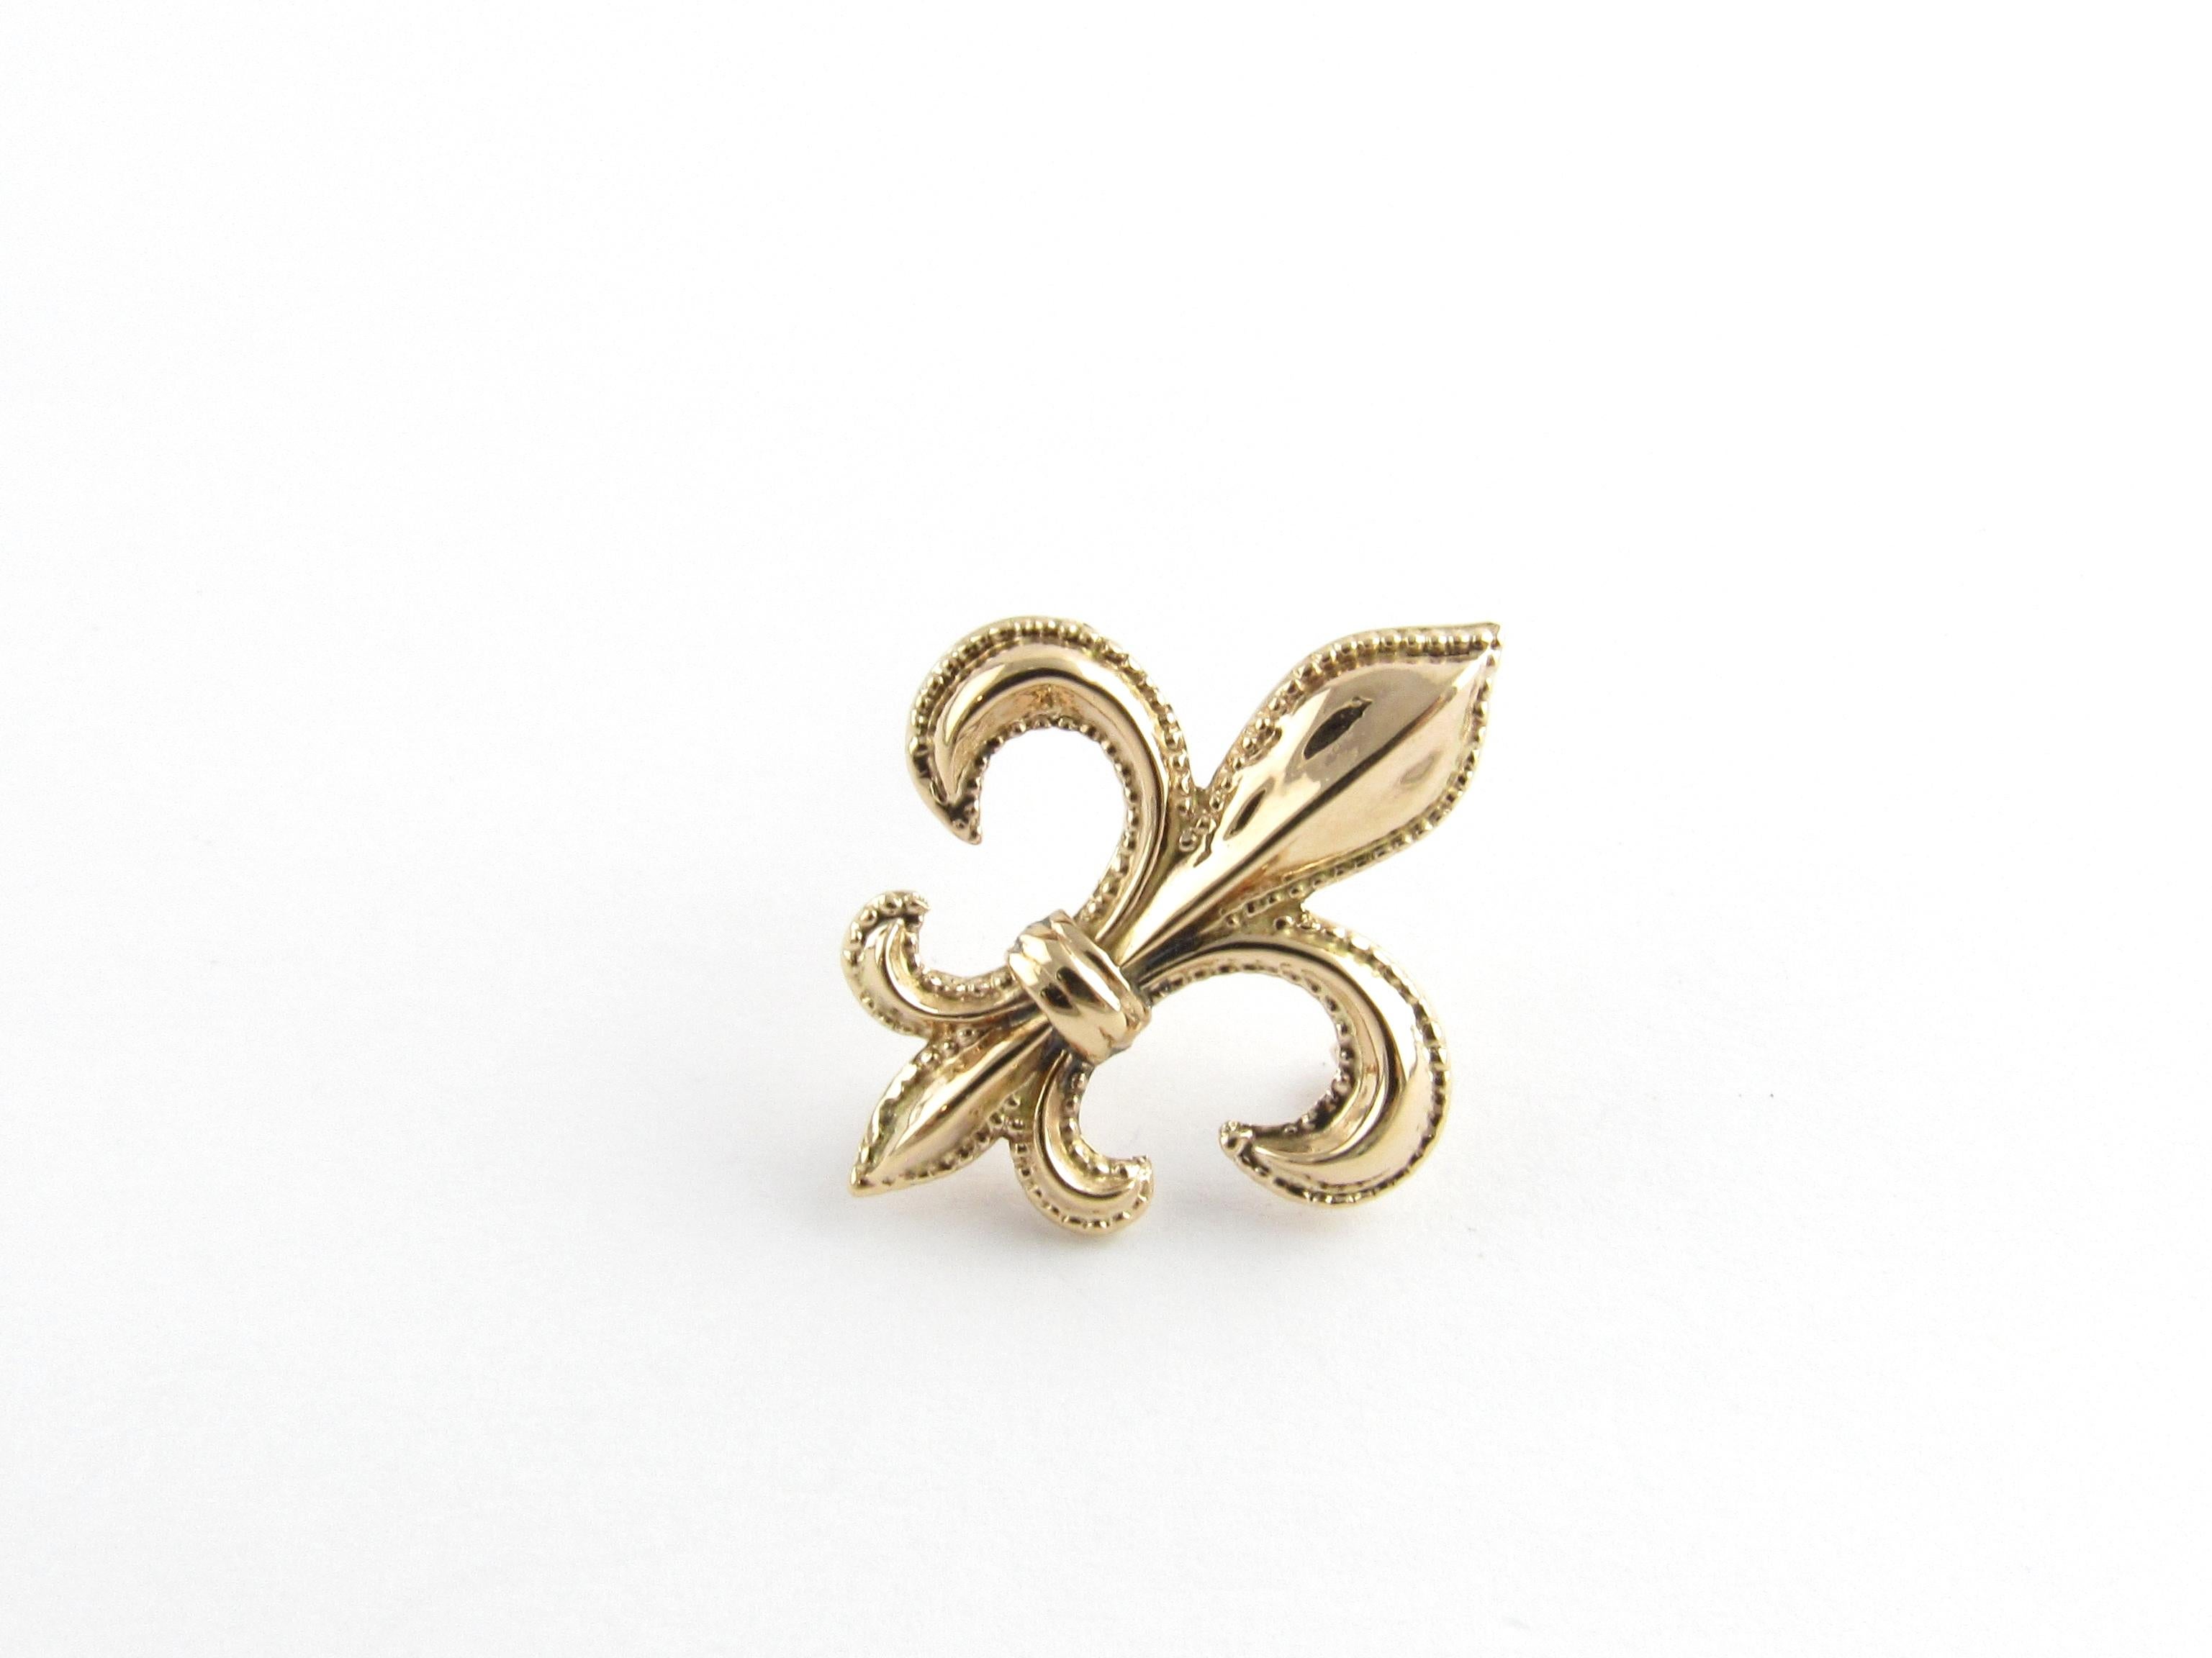 Vintage 10 Karat Yellow Gold Fleur de Lis Brooch/Pin

This lovely brooch features a beautifully detailed fleur de lis crafted in classic 10K yellow gold.

Size: 25 mm x 20 mm

Weight: 0.8 dwt. / 1.3 gr.

Stamped: 10K

Very good condition,